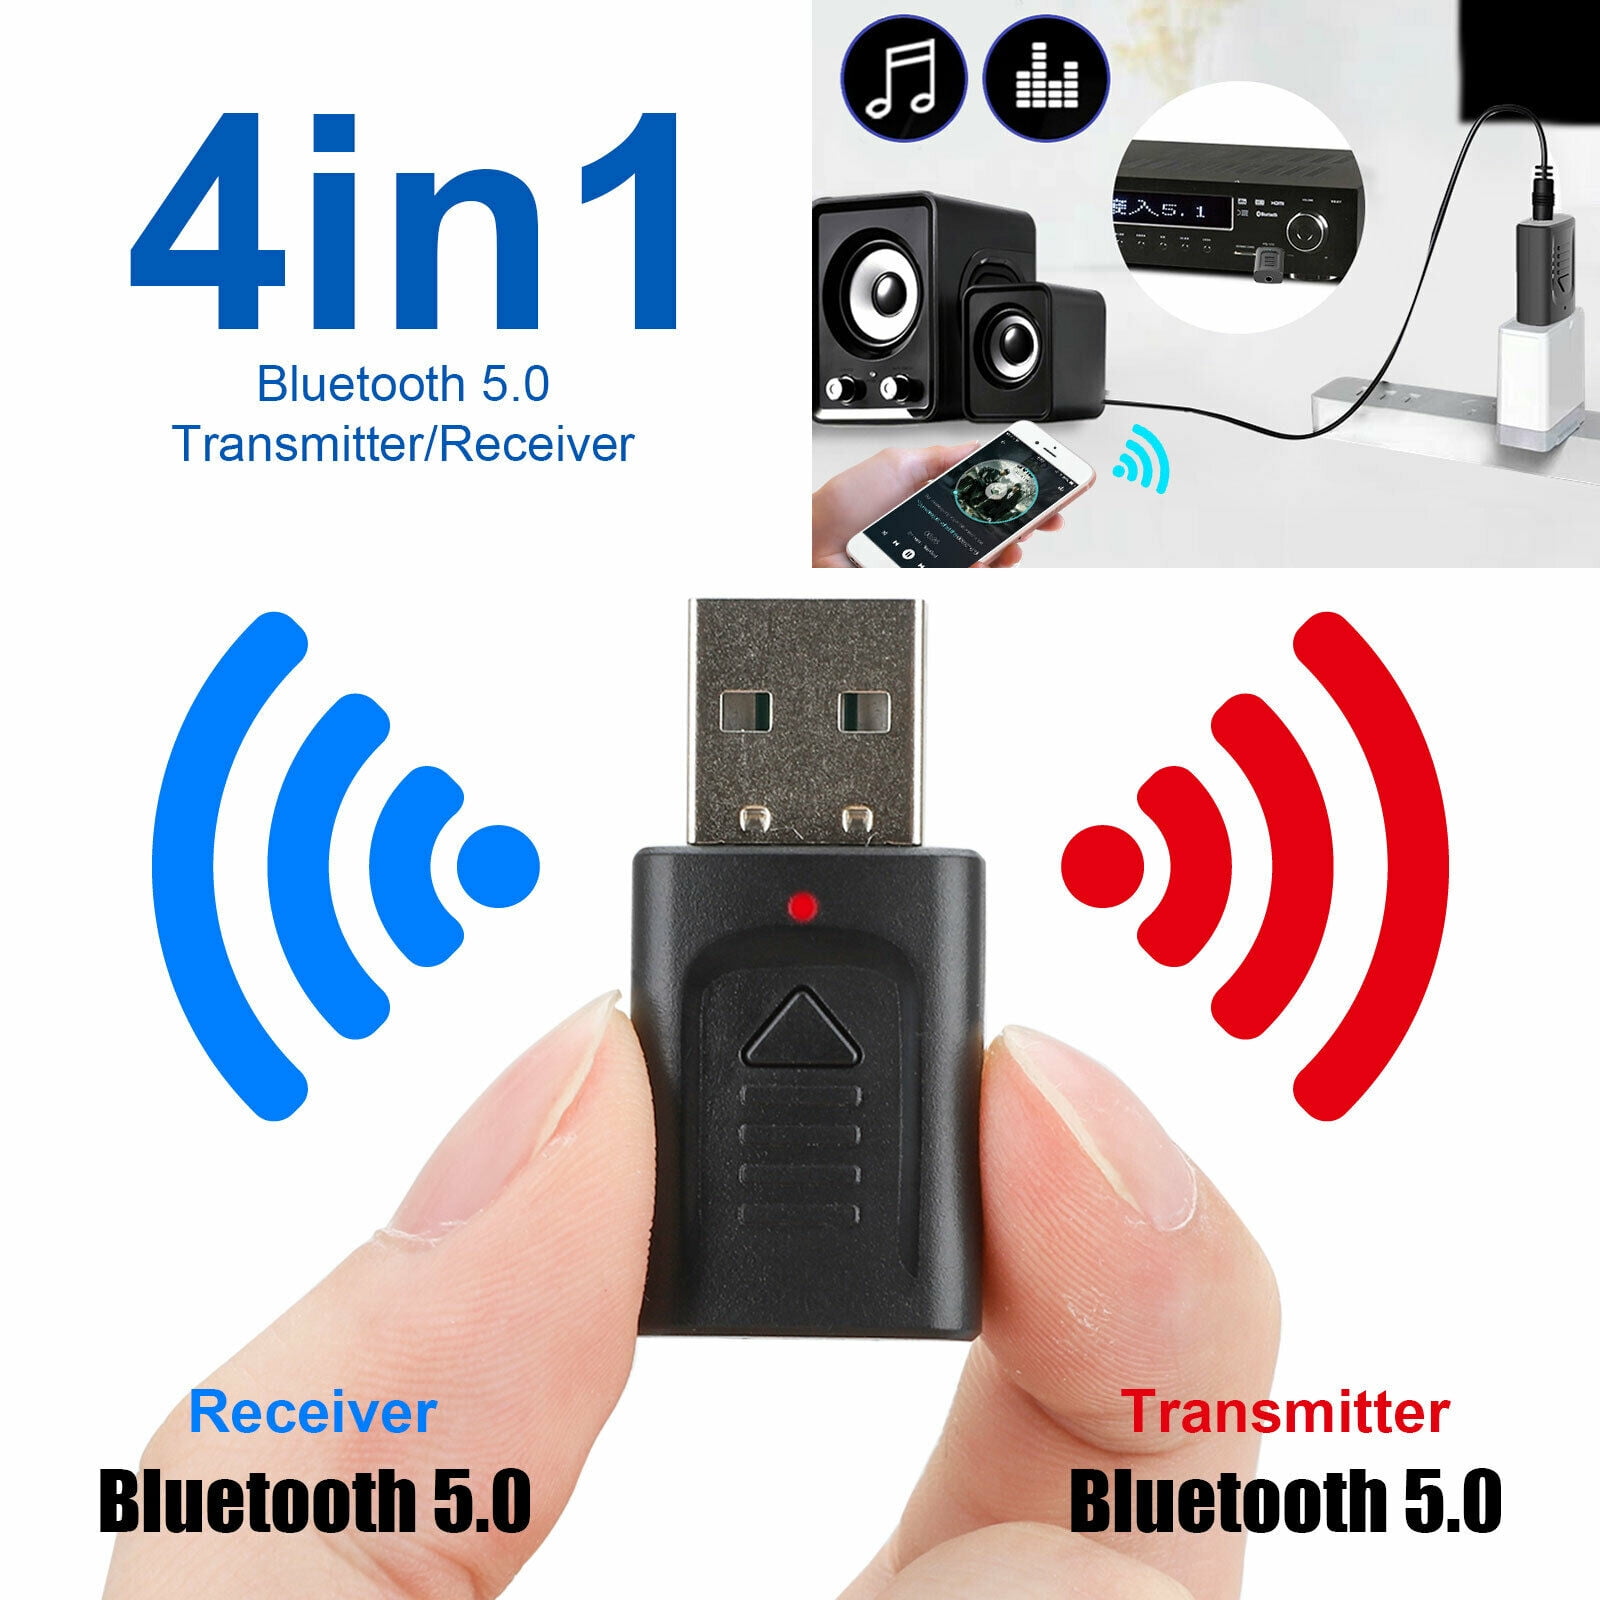 Bluetooth Receiver Transmitter, 4in1 Mini USB Bluetooth 5.0 Audio Transmitter & Wireless 3.5mm Aux Adapter Receiver for Car/Home Stereo Headphones Speakers TV PC Projector CD - Walmart.com